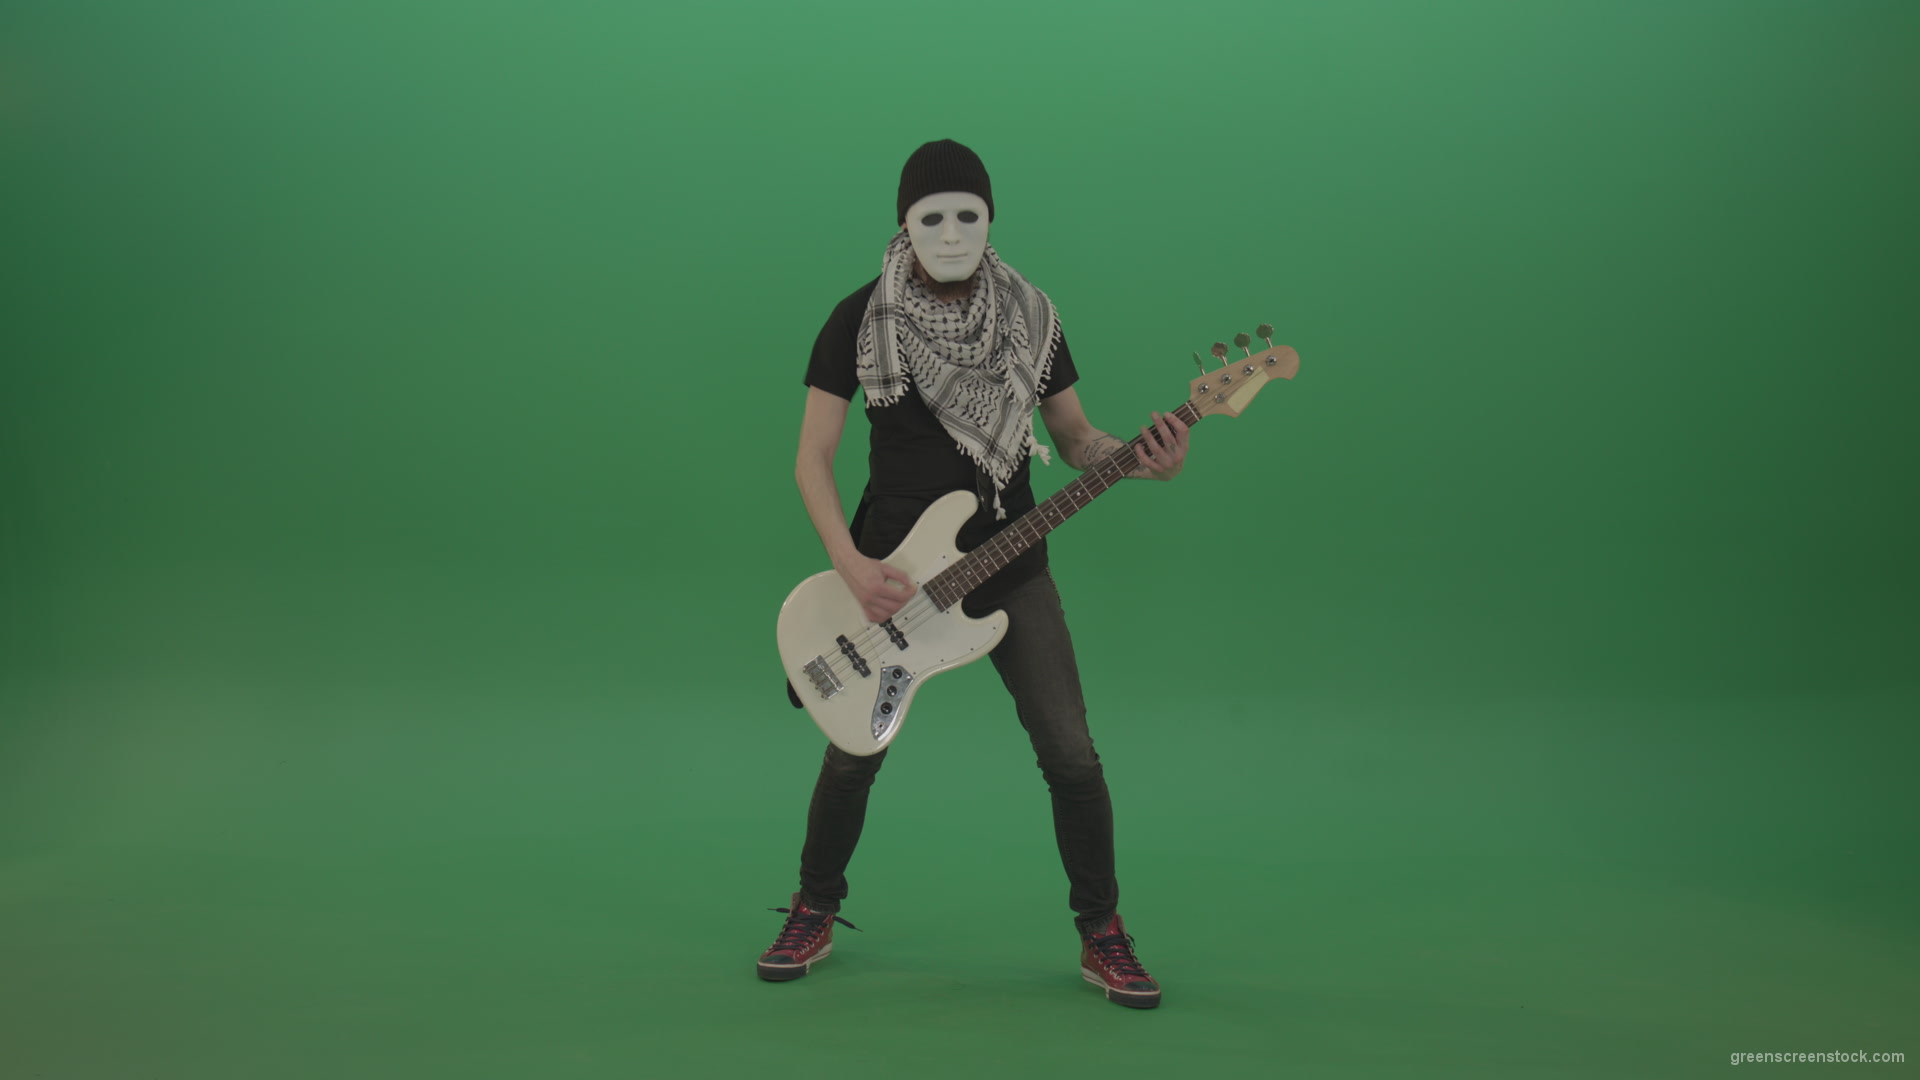 Bass-guitaris-in-full-size-play-white-guitar-in-white-mask-on-chromakey-green-screen_008 Green Screen Stock